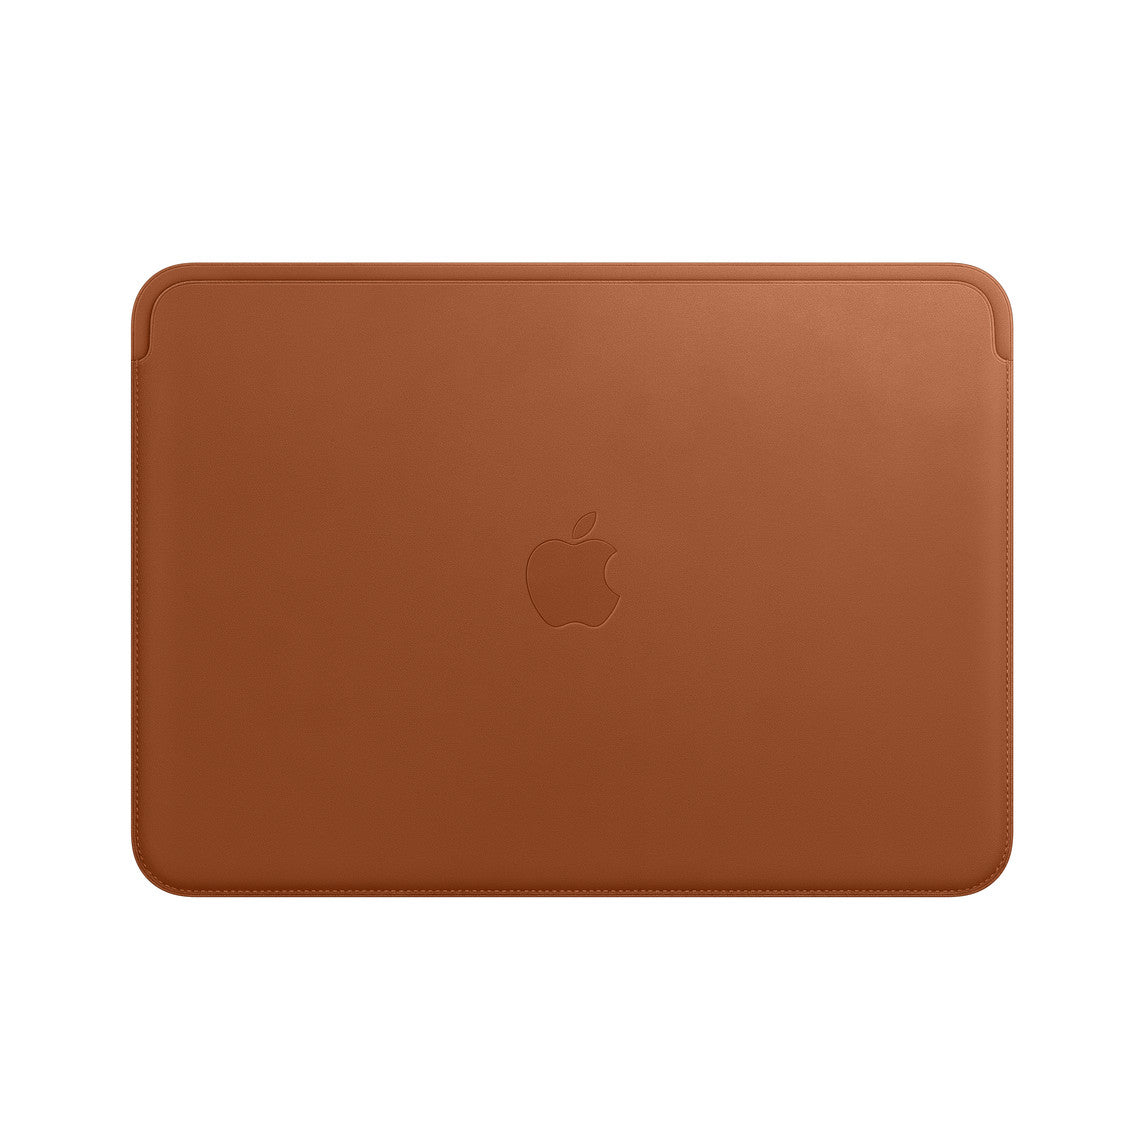 Macbook 16 inch Leather Sleeve Saddle Brown Saddle Brown New - Sealed